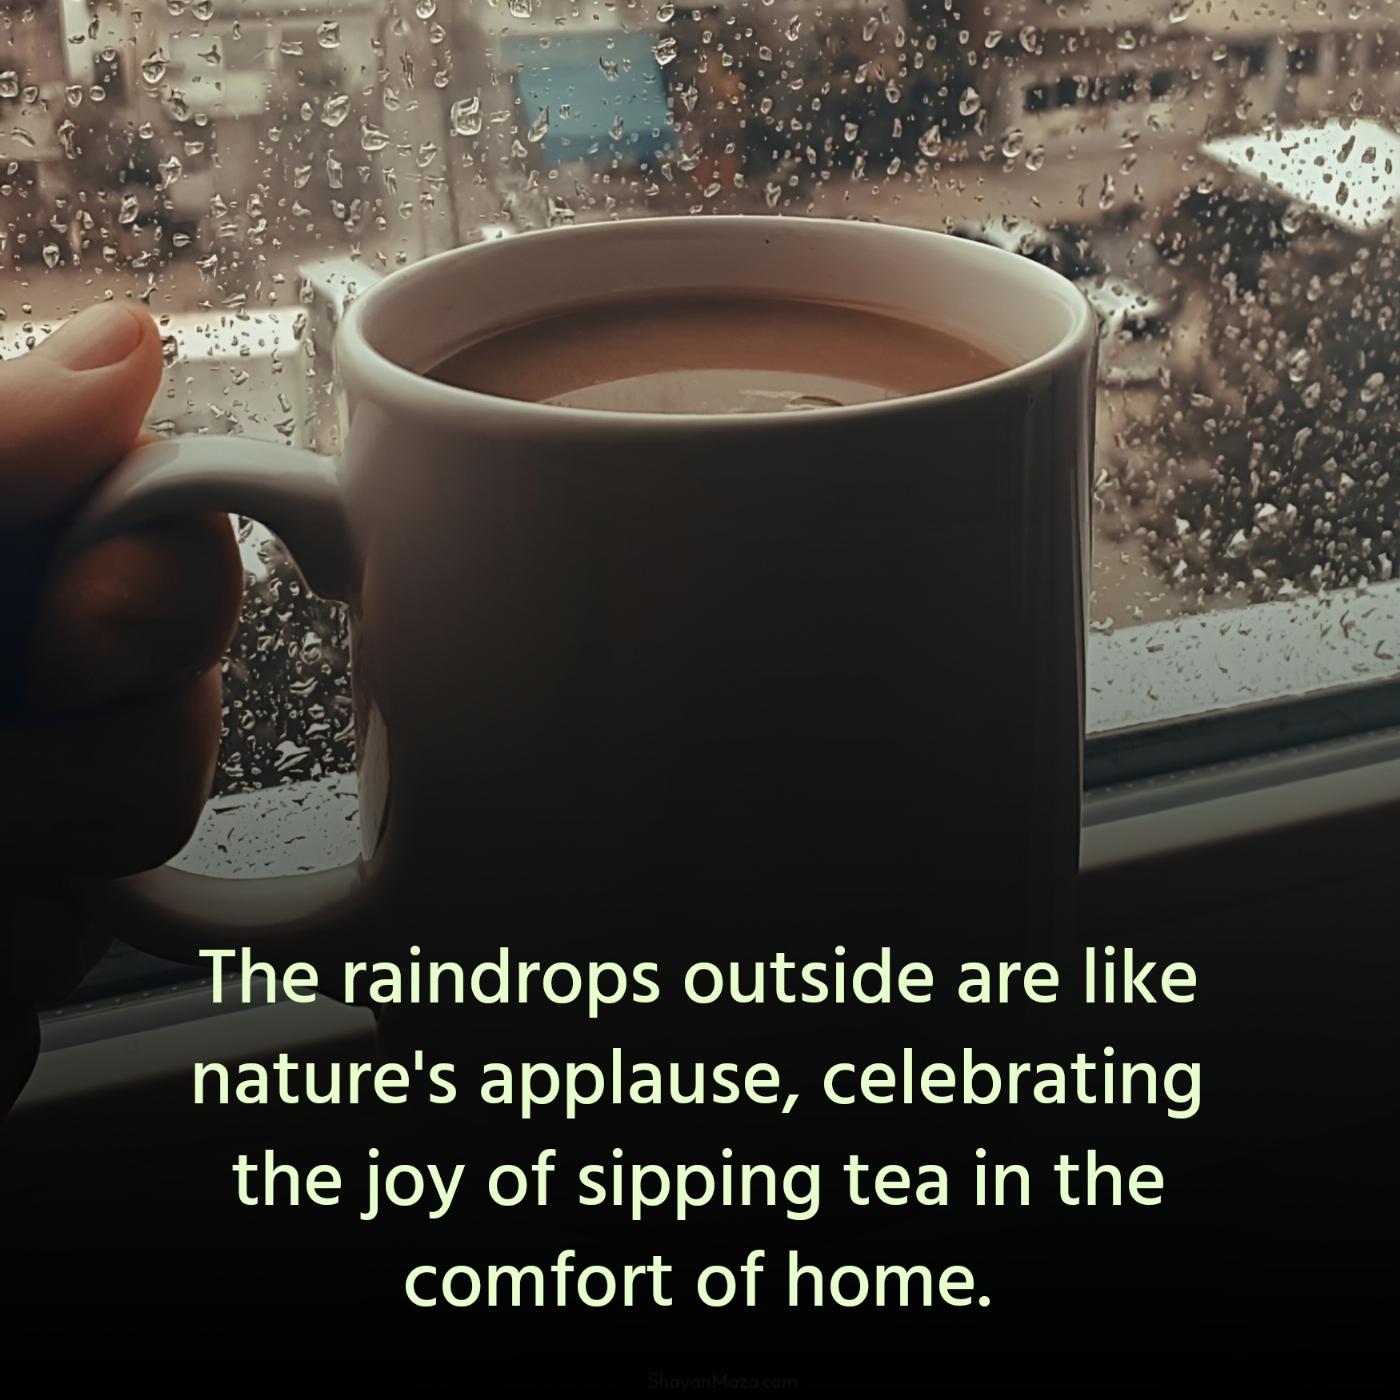 The raindrops outside are like nature's applause